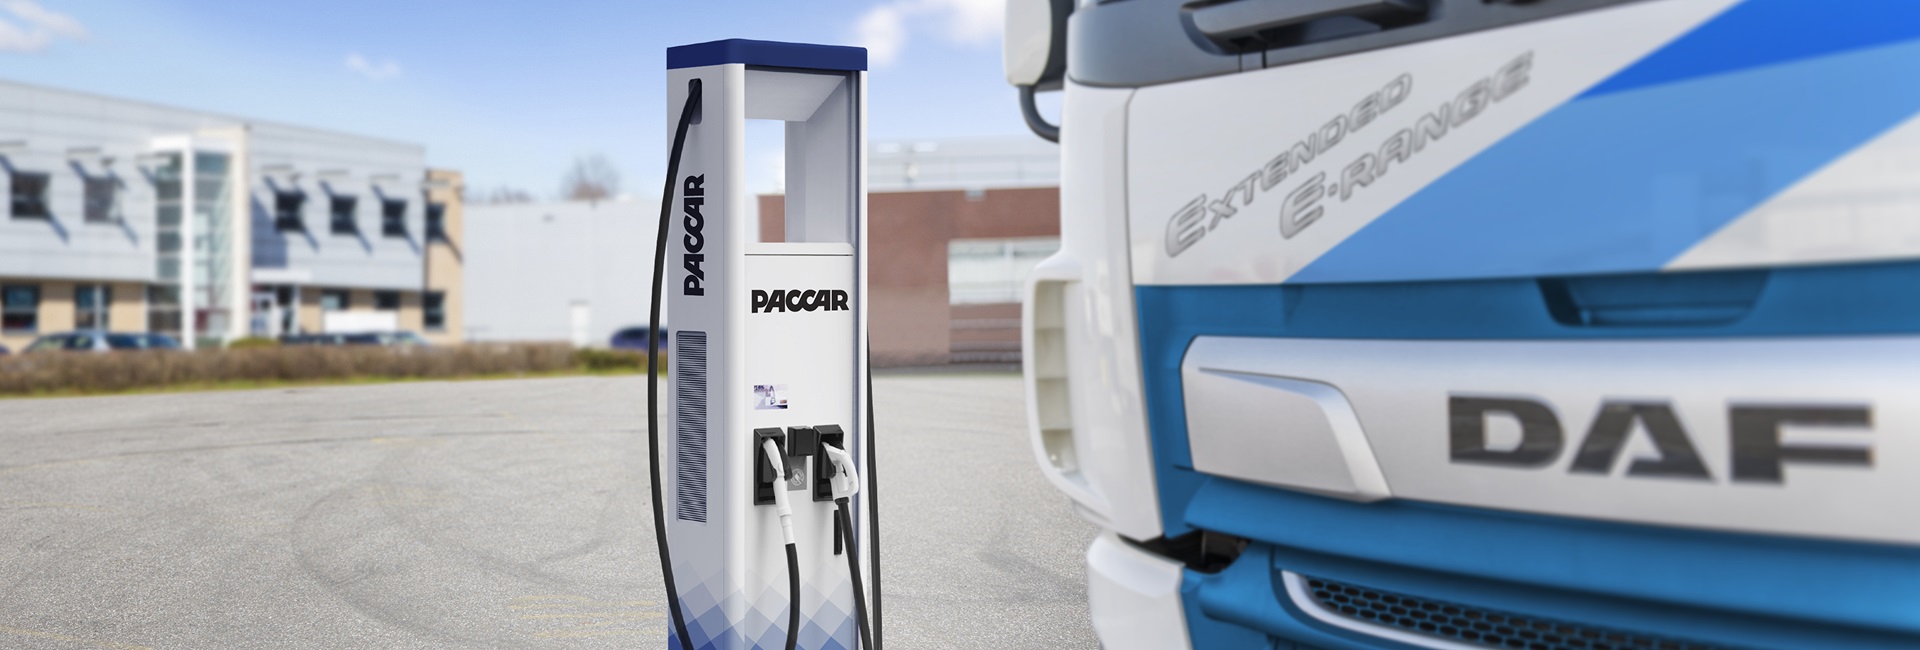 PACCAR-electric-charging-station-2021026a_3840x1300px